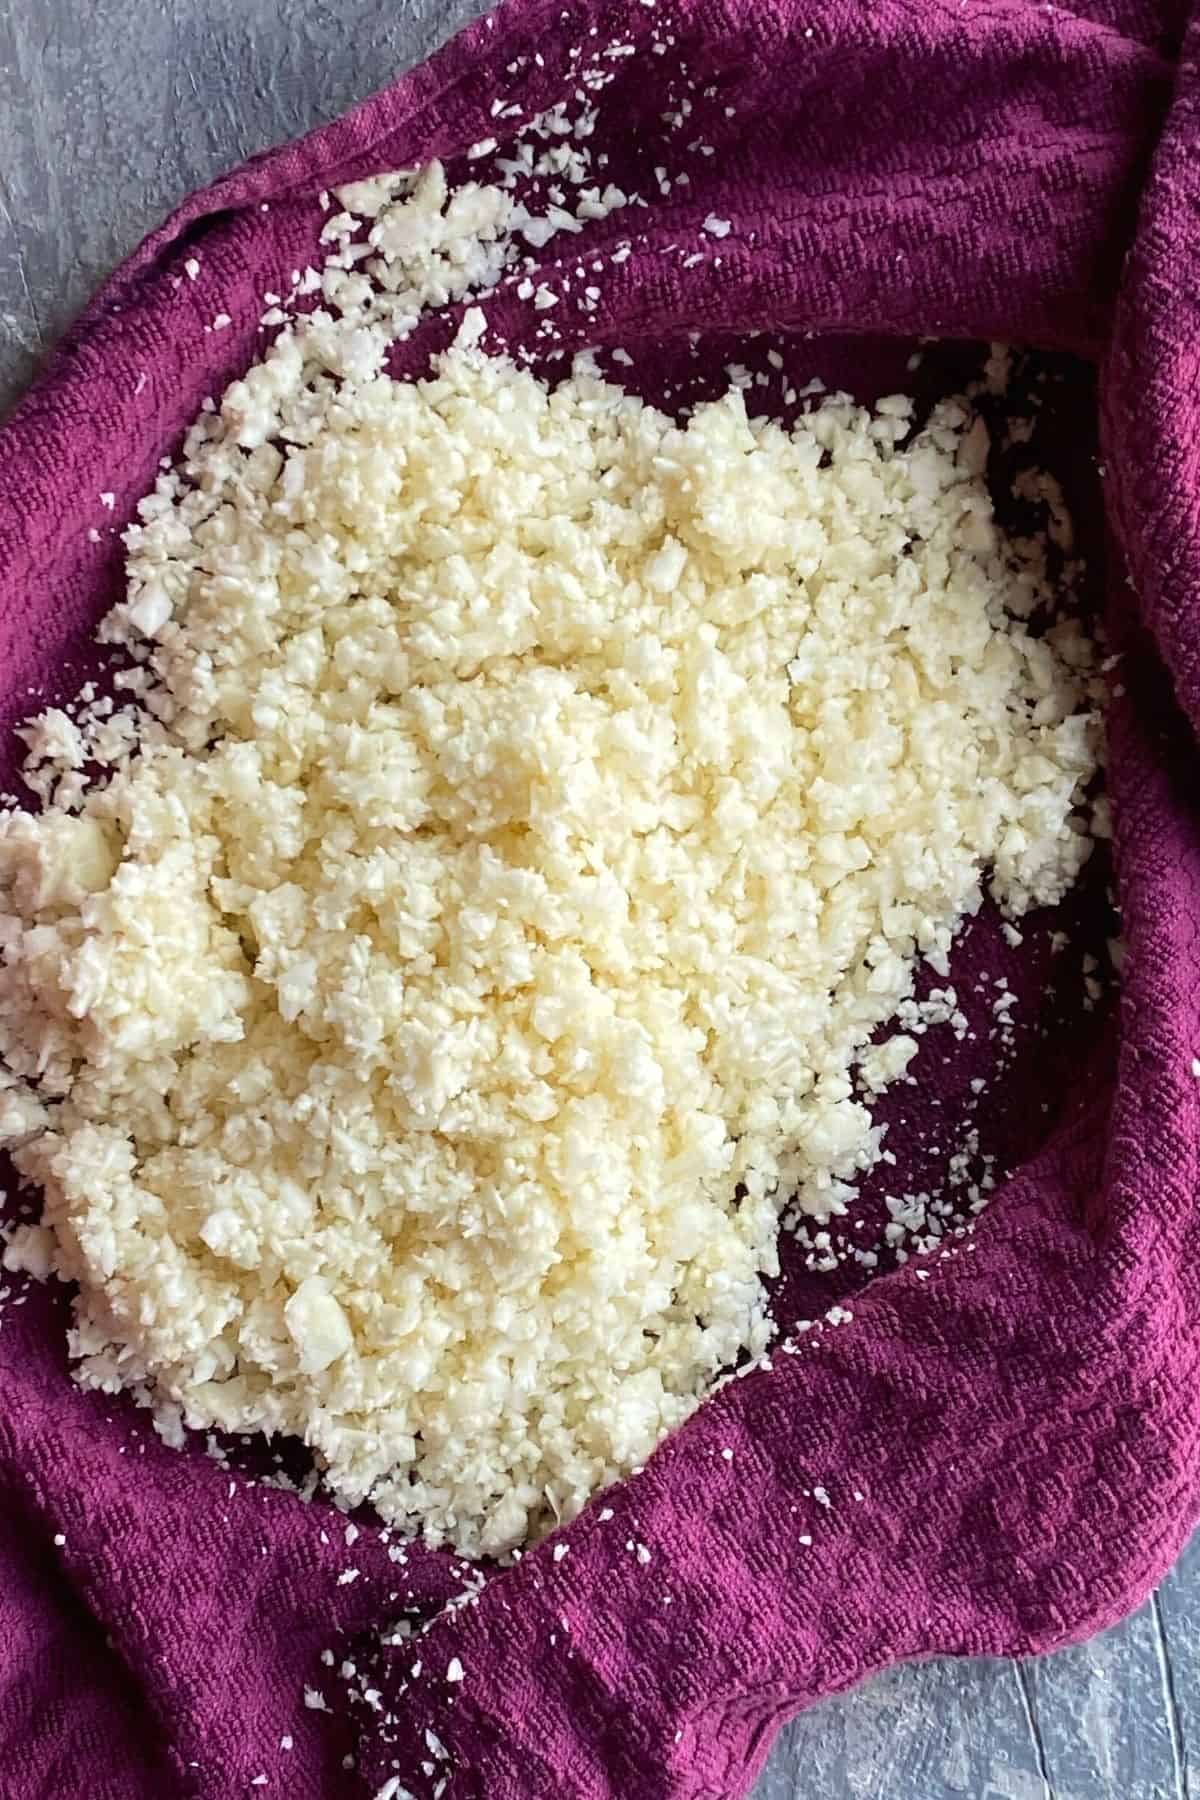 A purple cheesecloth with a pile of cauliflower rice on it